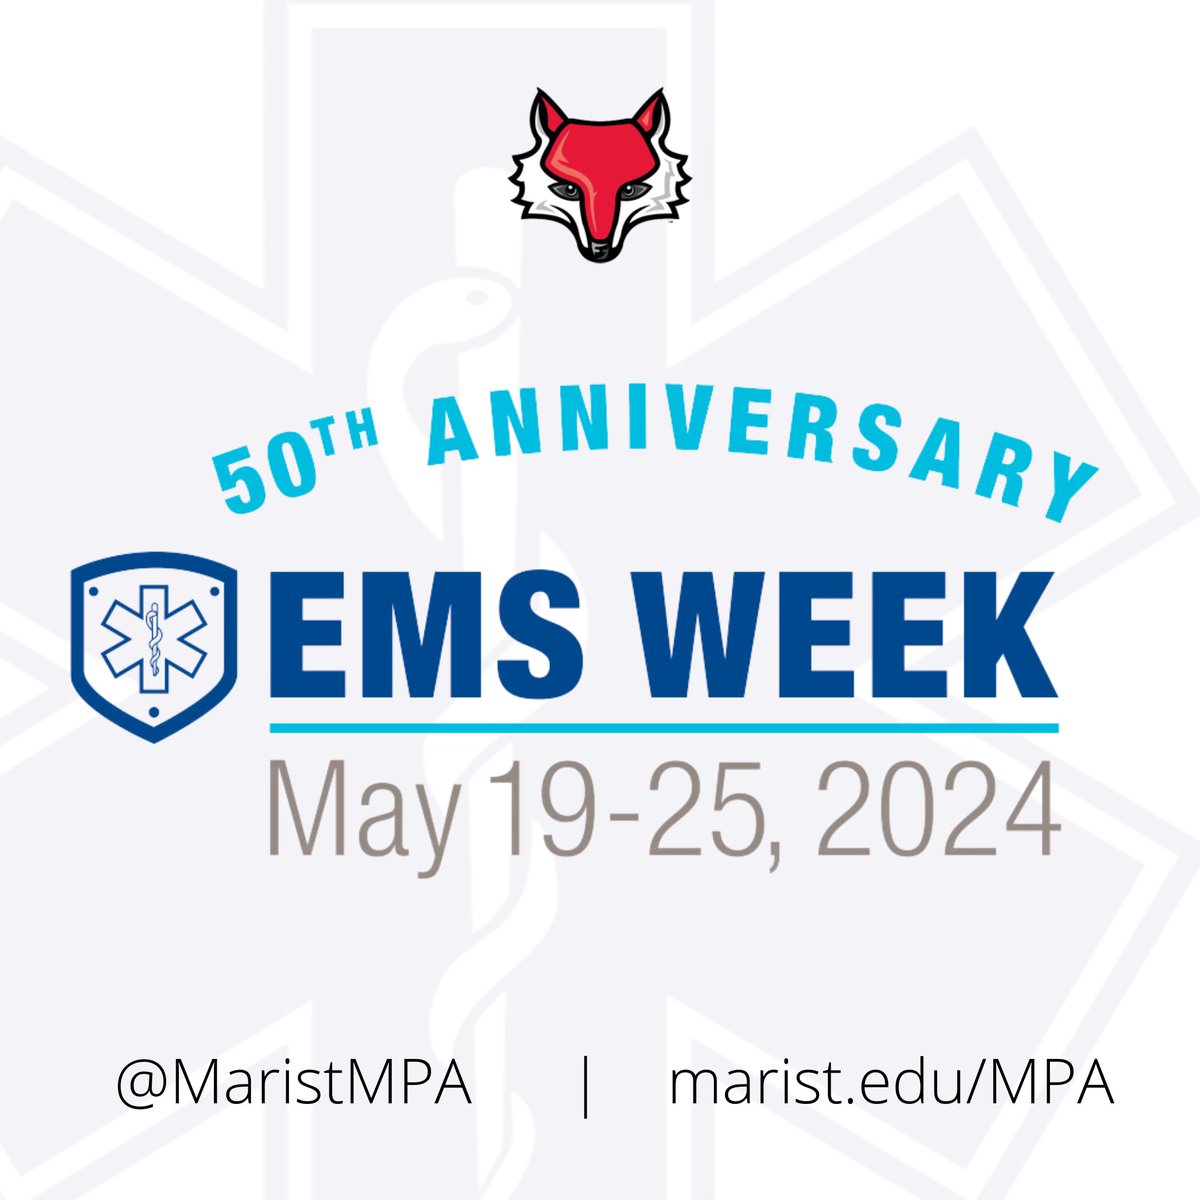 The Marist MPA program is proud to celebrate the 50th anniversary of Emergency Medical Services Week. We're grateful for the dedication, skill, and professionalism of our MPA students who work in EMS, and for our local campus EMS provider @FairviewFireDis #NationalEMSWeek